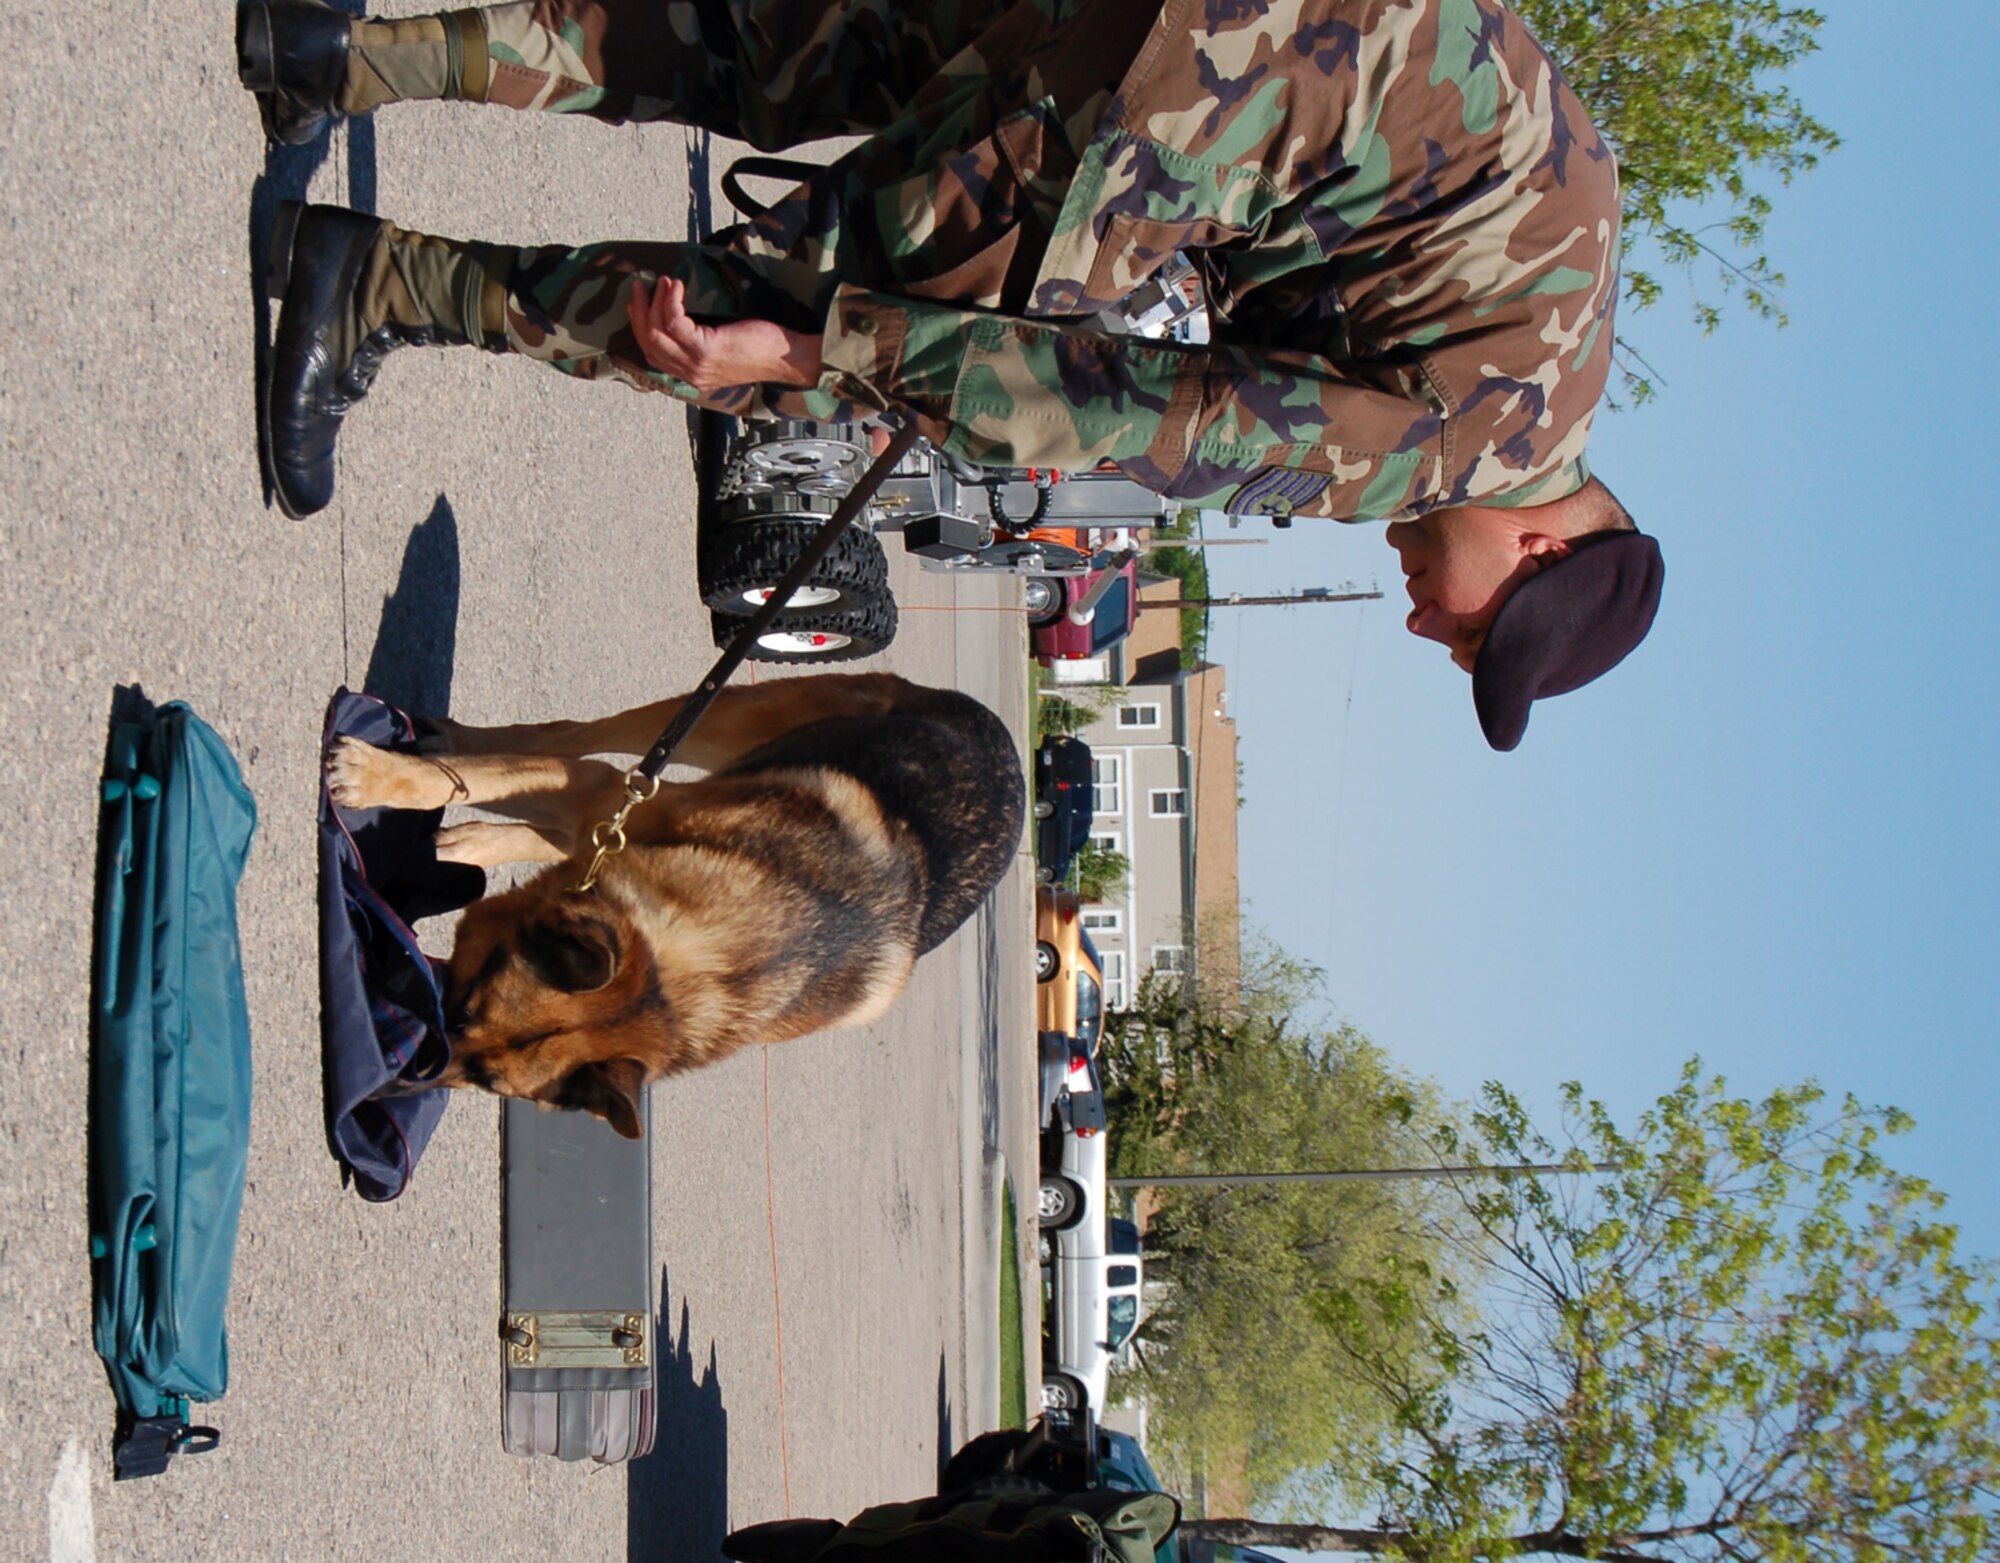 Tech. Sgt. Michael Laughlin, 319th Security Forces Squadron, directs his dog Indy to sniff luggage for explosives during the military working dog demonstration for Police Week May 16. (U.S. Air Force photo/ Airman 1st Class Ashley Coomes)